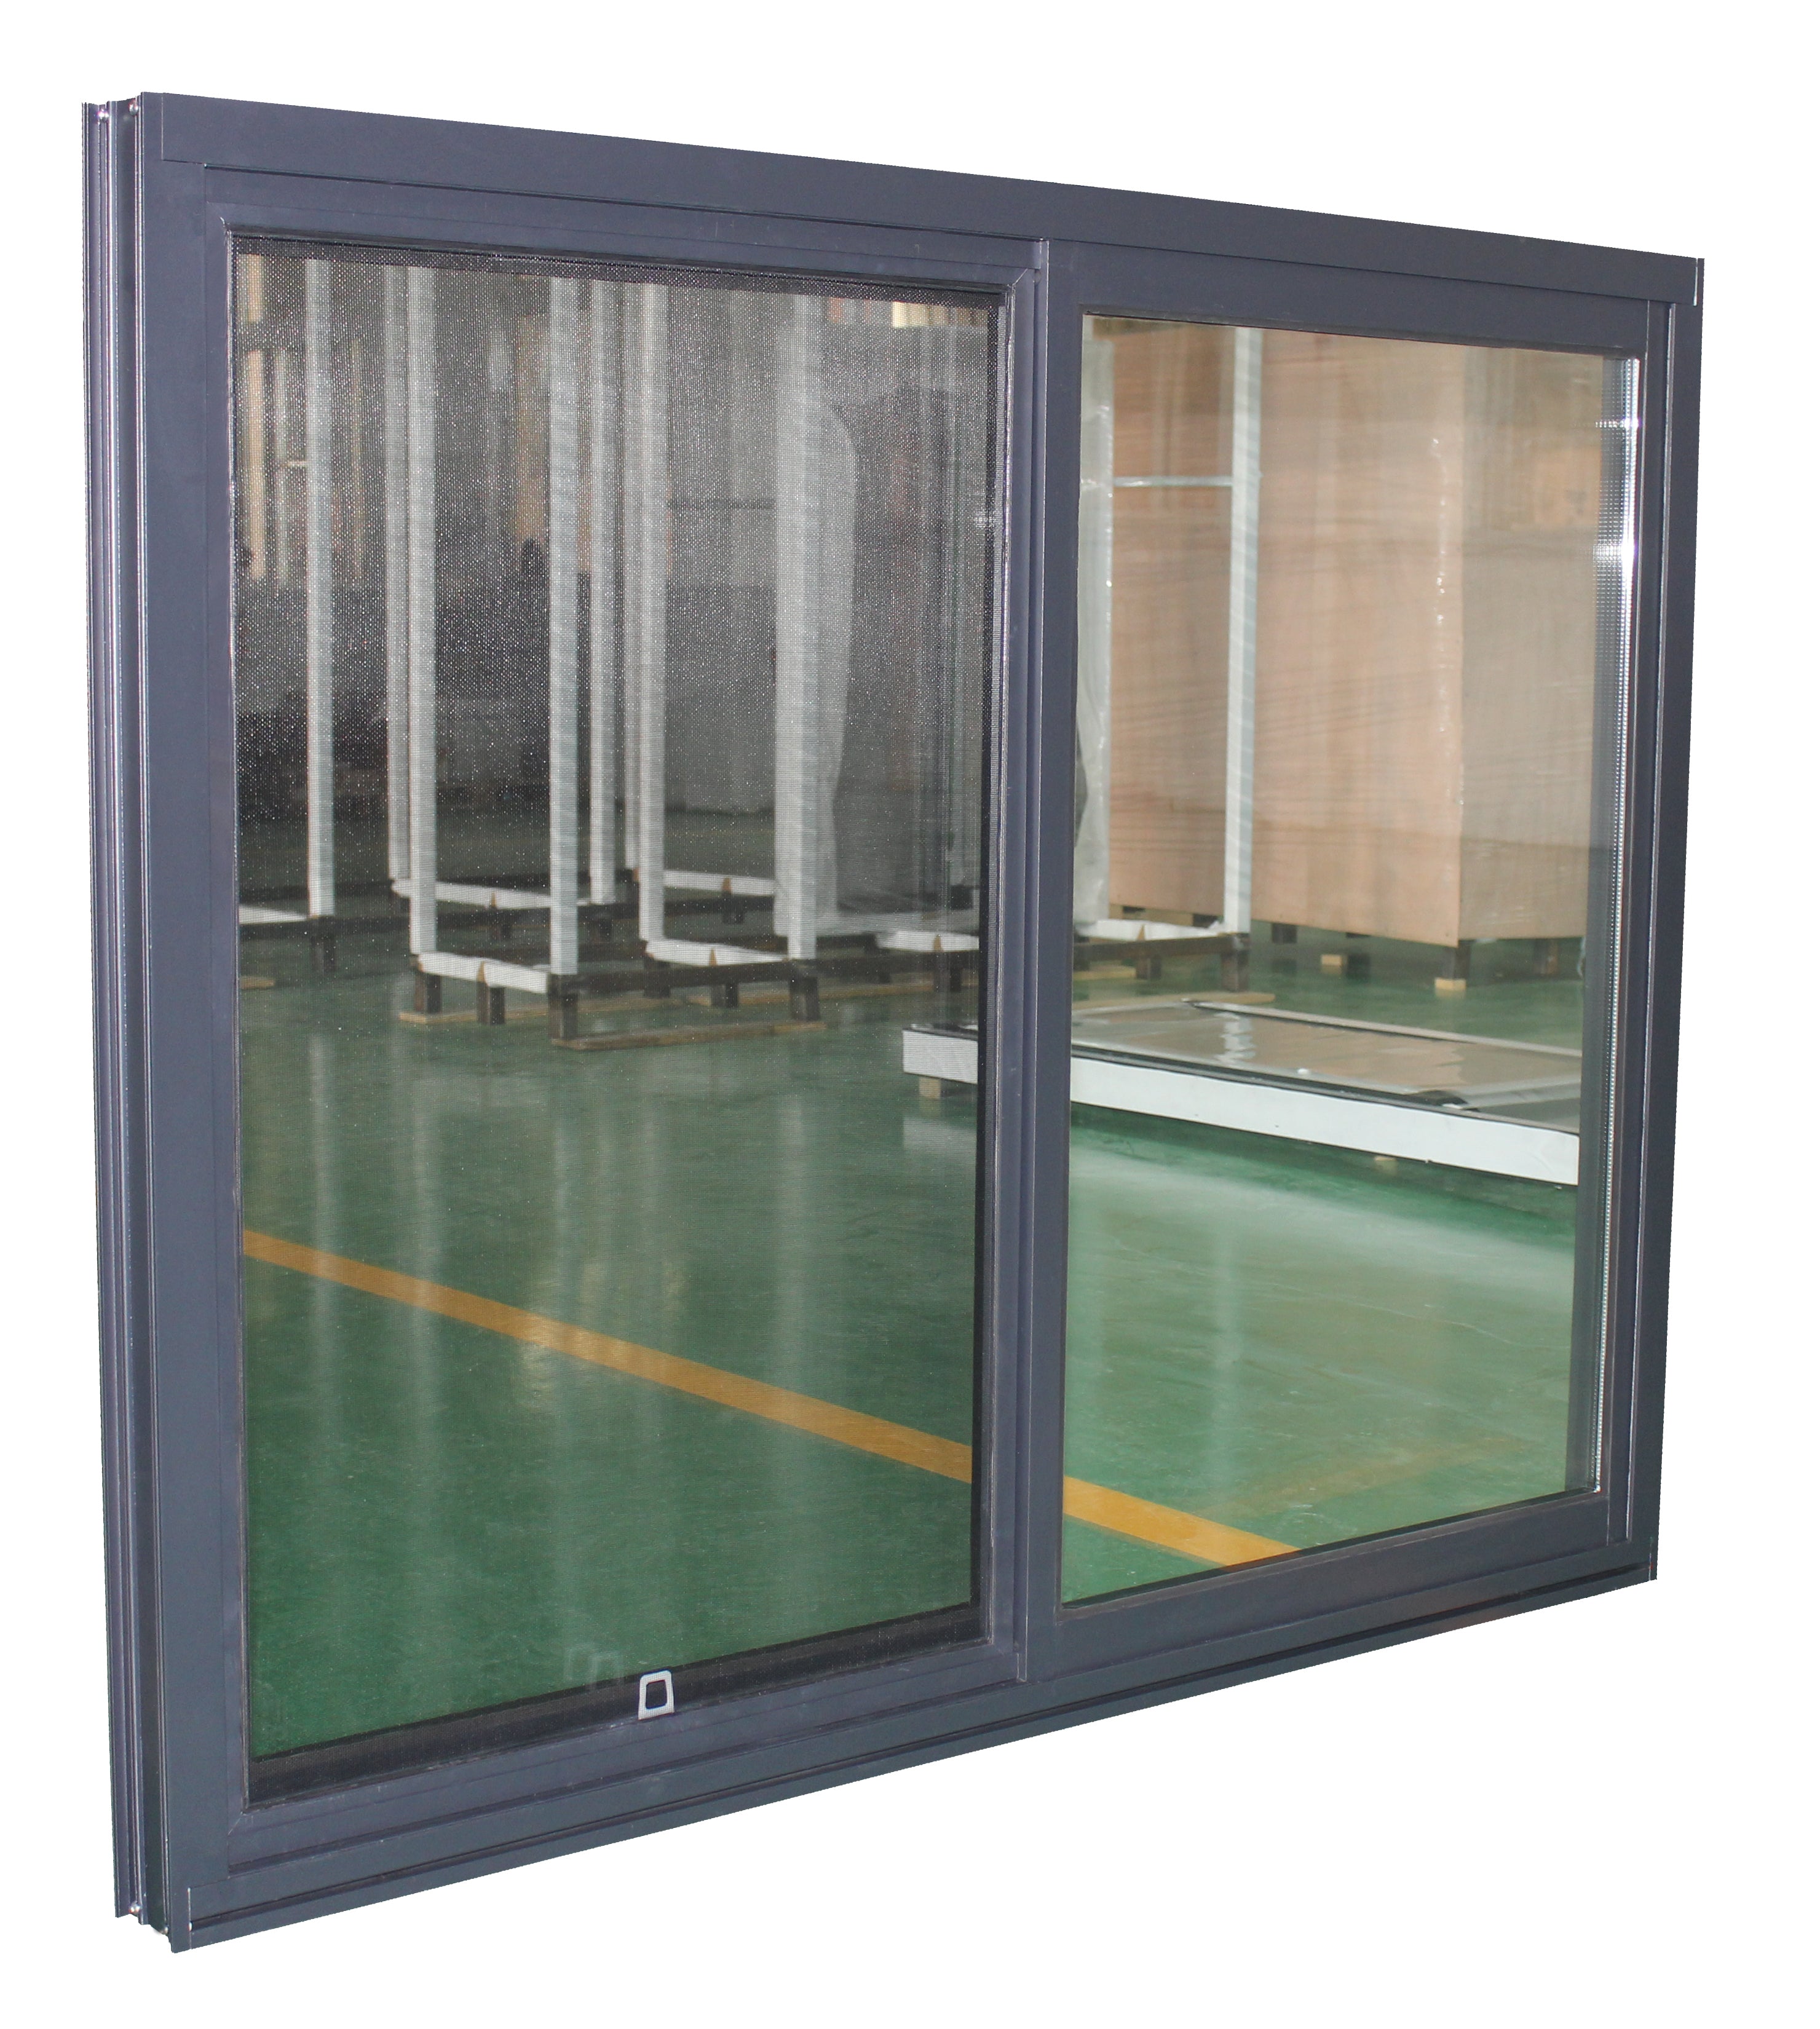 Superwu Double-glazed Sliding Windows With Beautiful Appearance And Economical Price